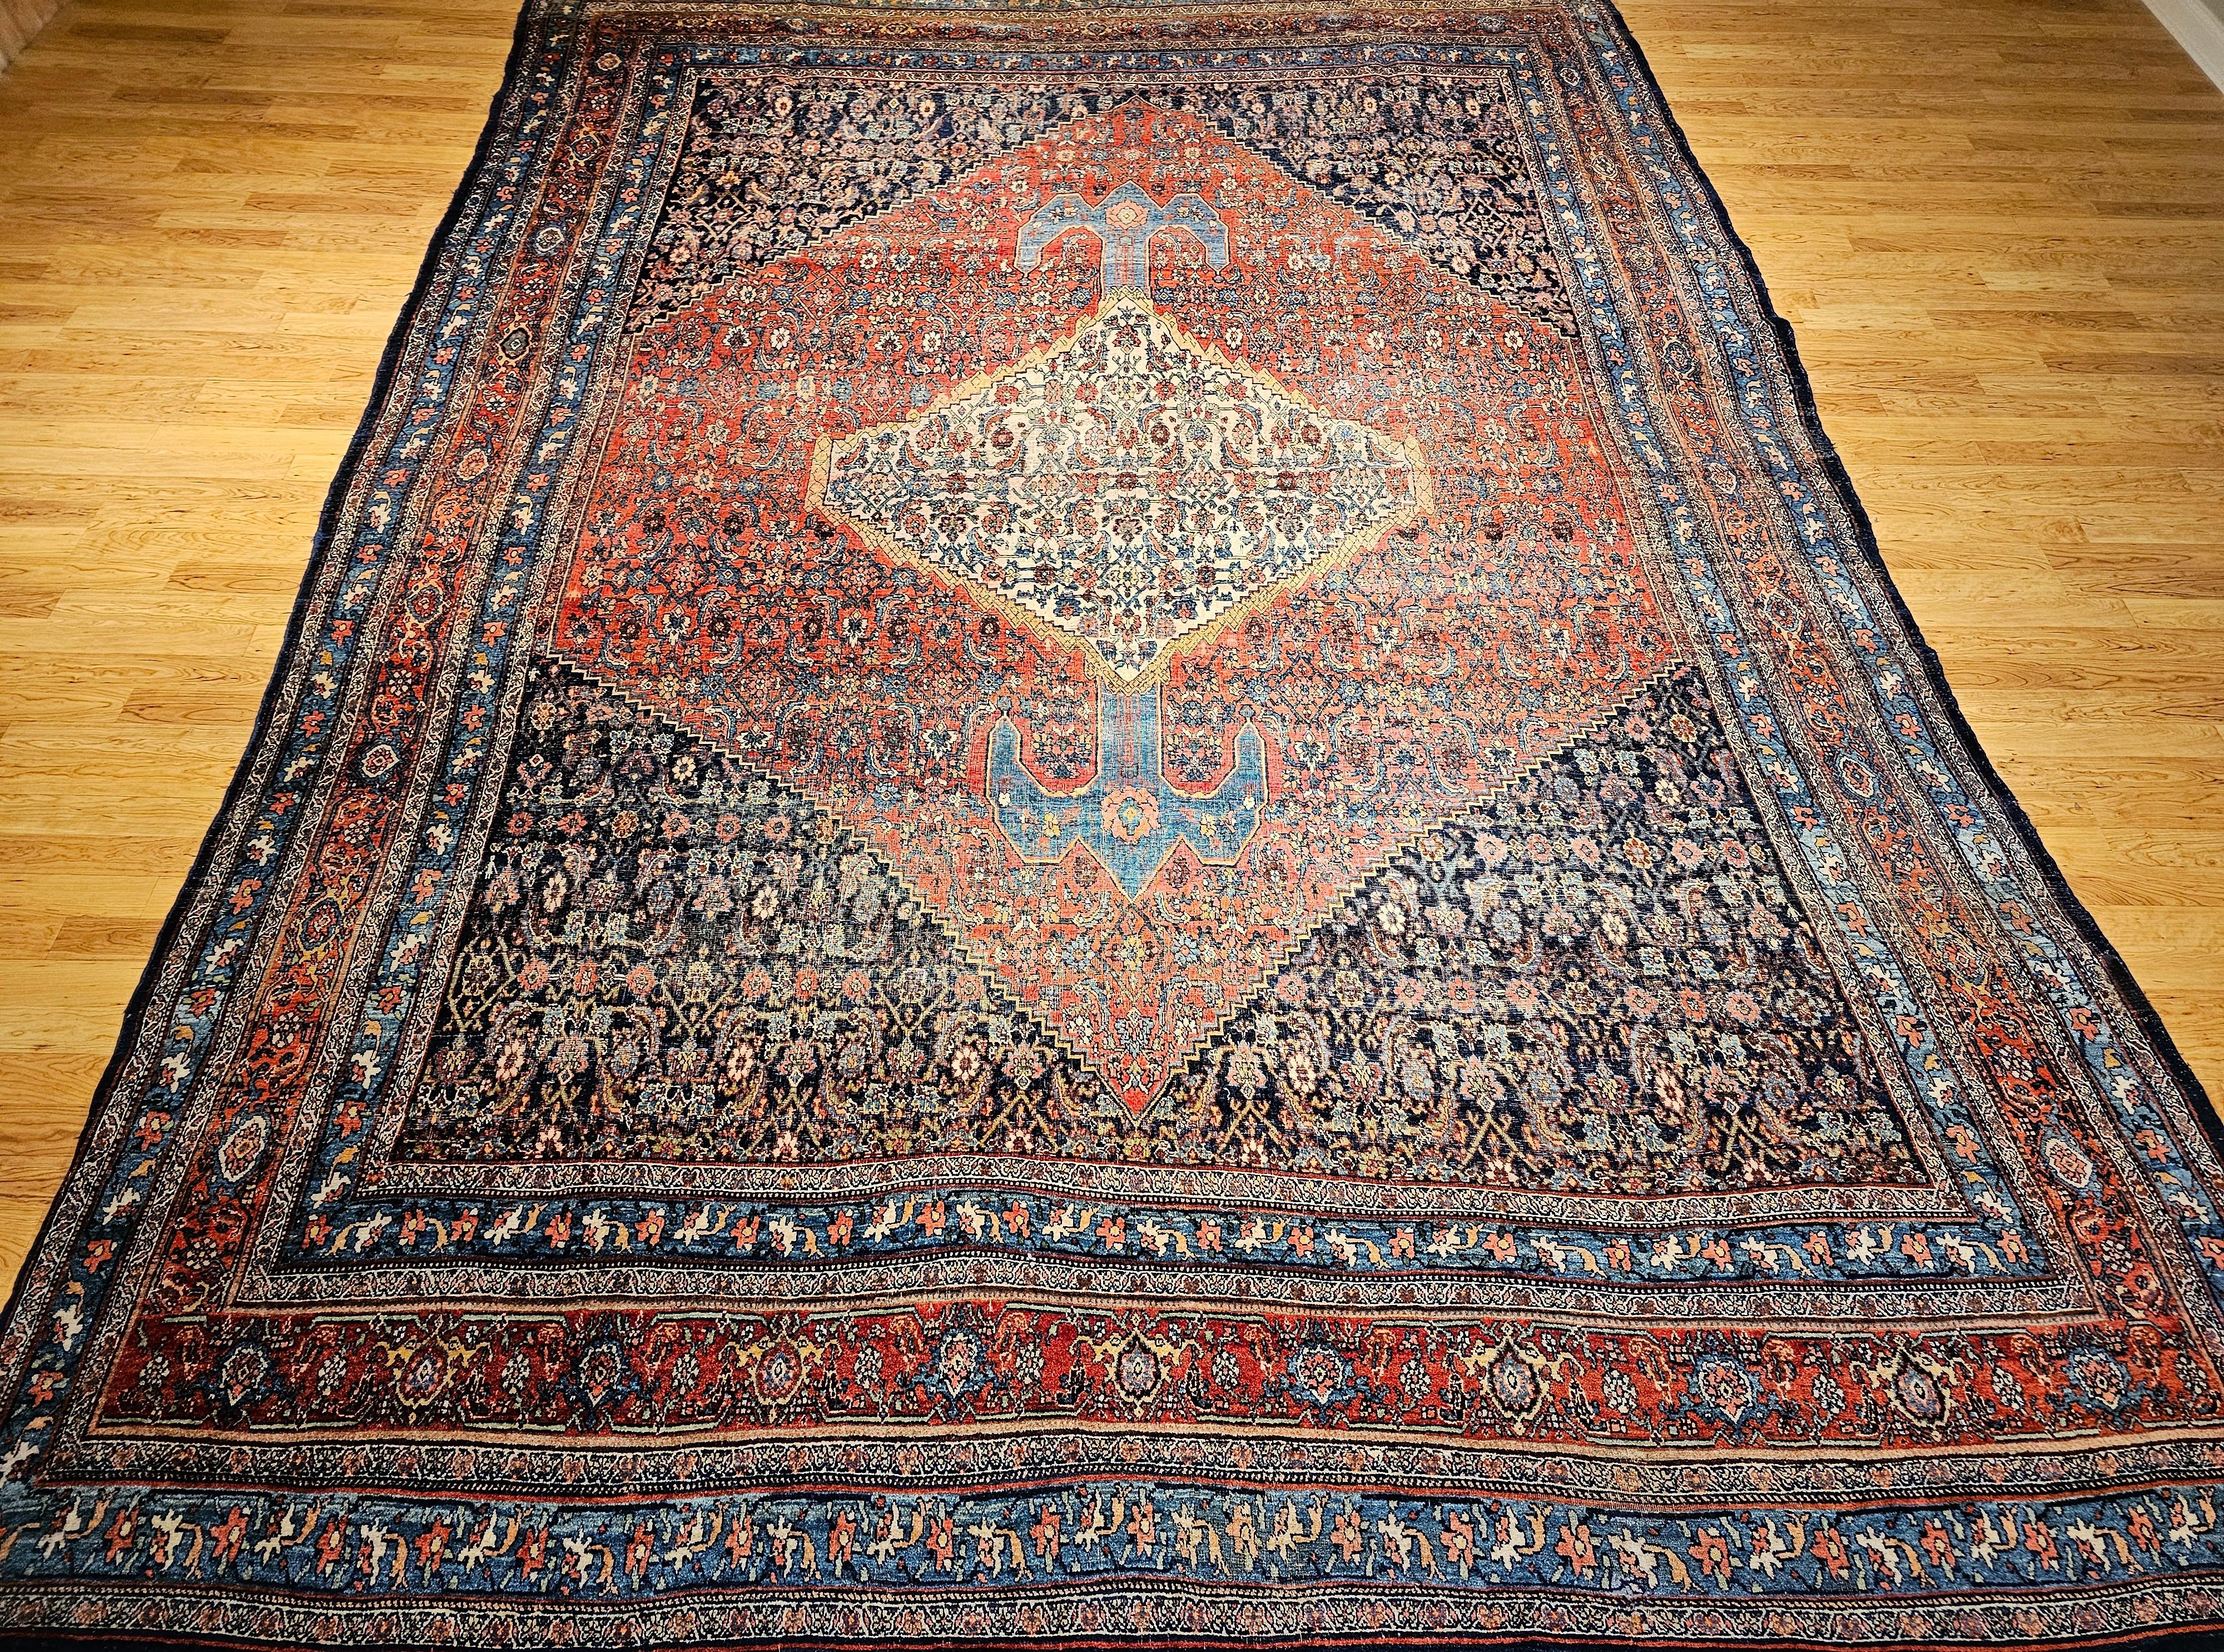 Beautiful 19th century oversized Persian Bidjar area rug with a medallion design in a Herati geometric pattern in red, French blue, ivory, navy, and yellow colors.   The rug has a combination of an abrash French blue and rich red field colors.   